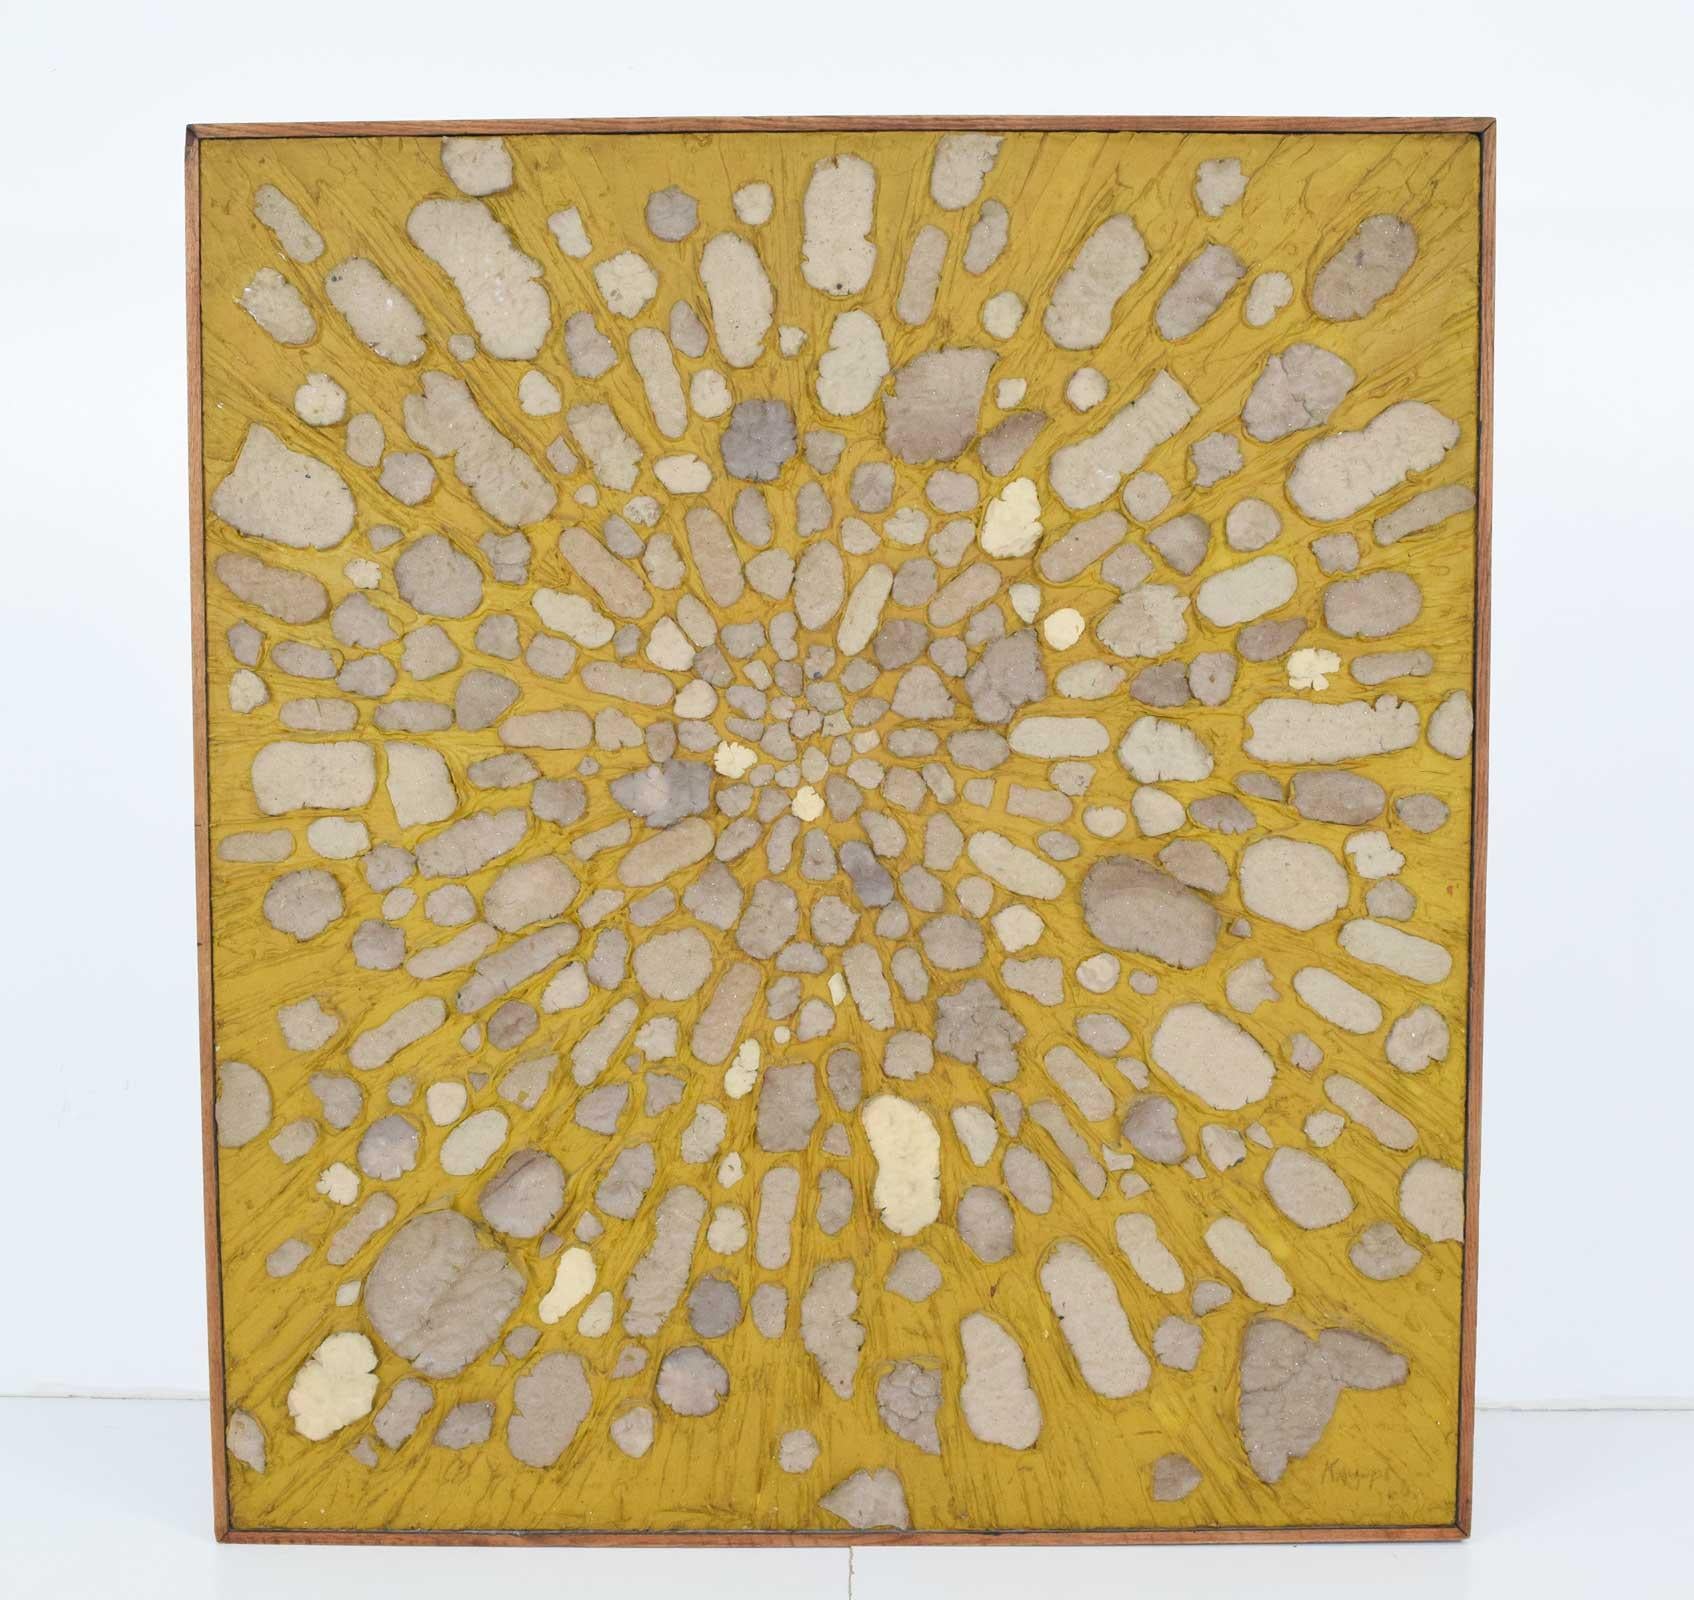 Kauppi Sten, (Swedish, 1922-2002): Abstract pottery medallions in a star burst pattern radiating from center, mustard yellow composite ground, mixed-media/wood panel, incised signature lower right, dated 1969, overall framed 54.75